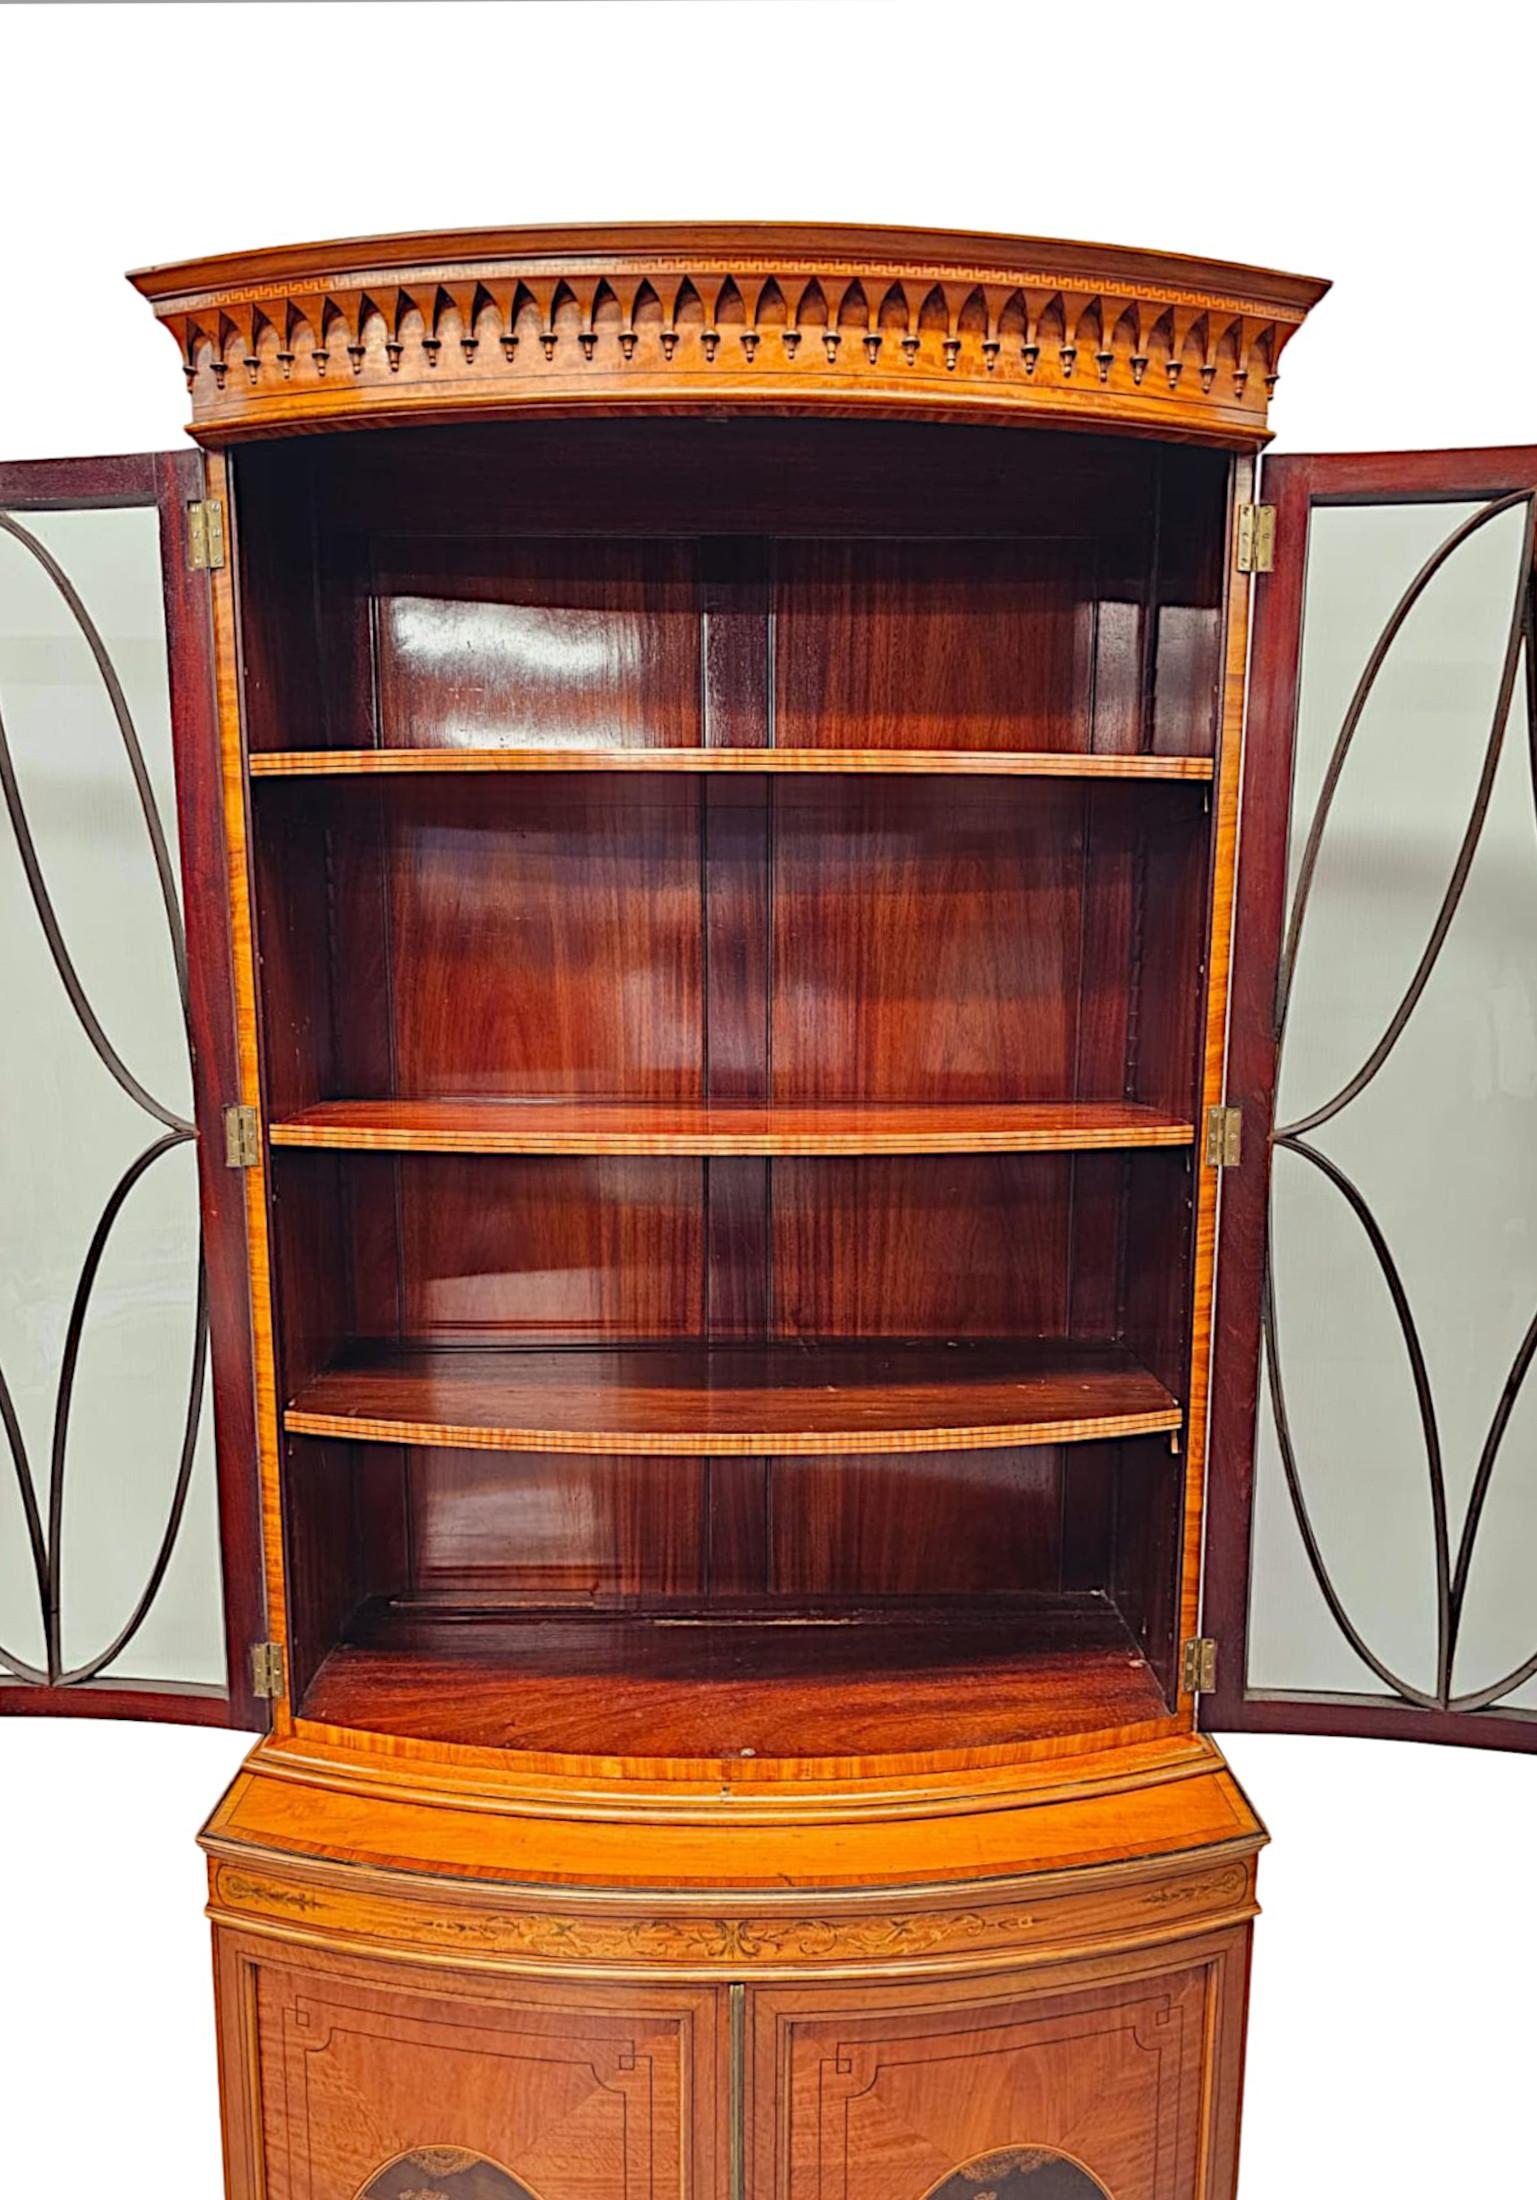 20th Century A  Fine Edwardian Marquetry Inlaid Bowfronted Bookcase afterf Edward and Roberts For Sale